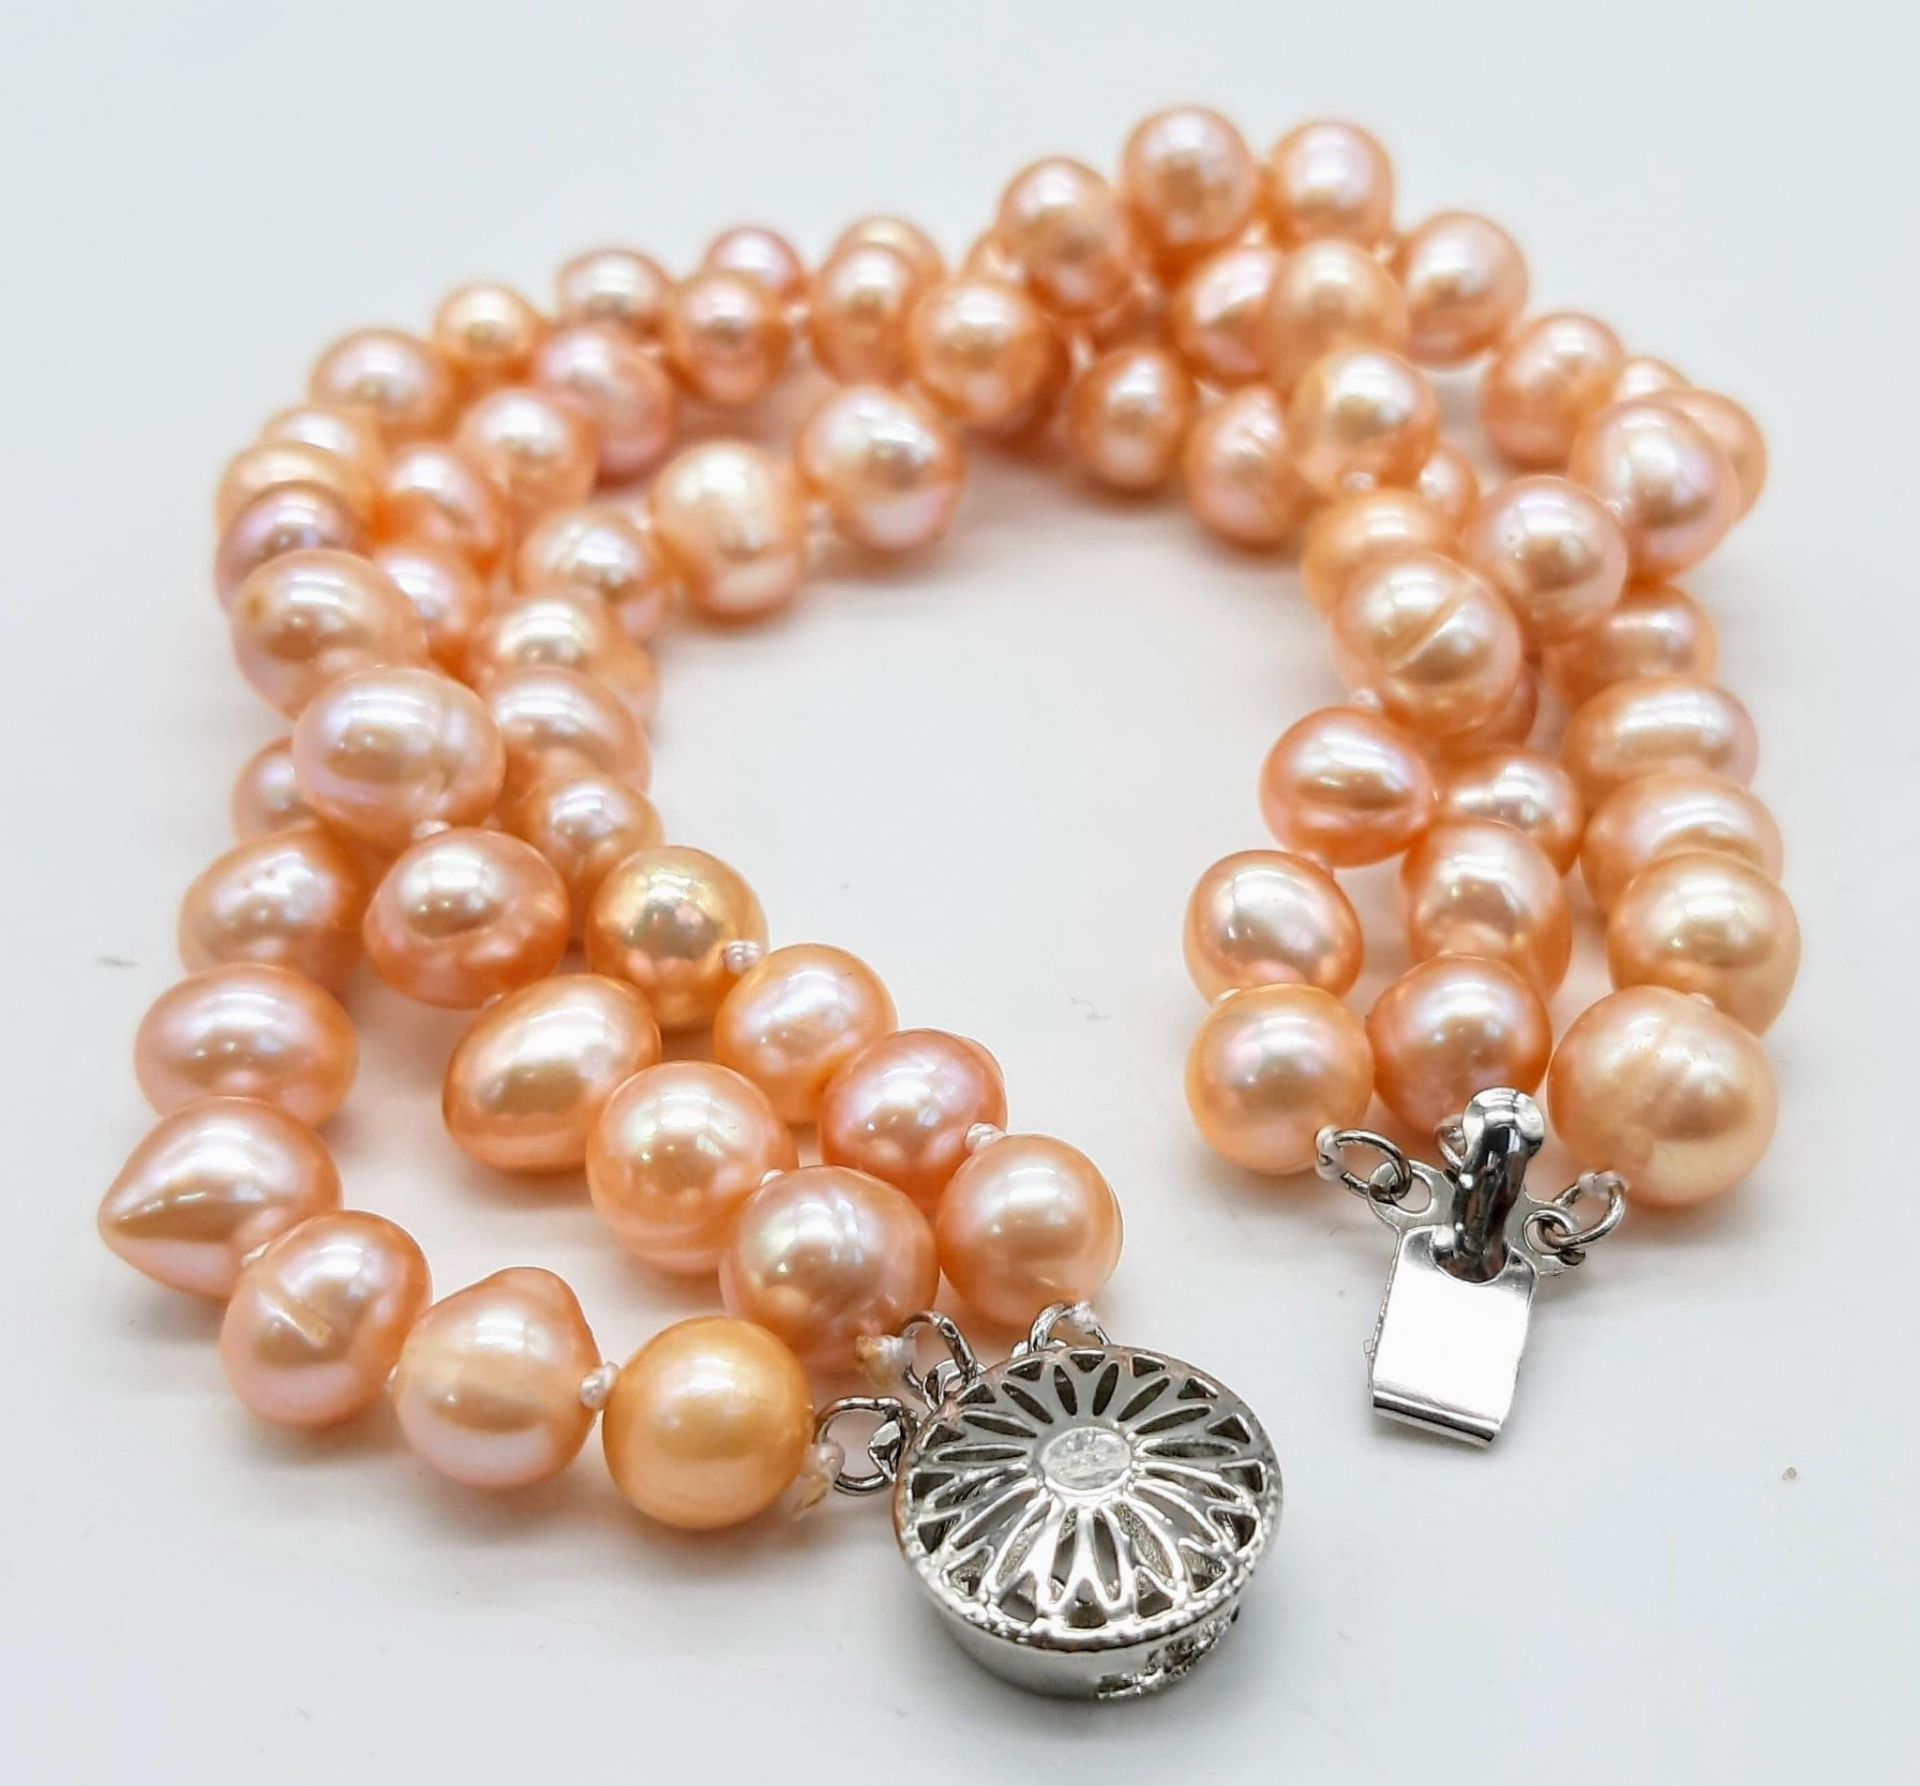 A fashionable three strand of high quality, natural pink pearls necklace, bracelet and earrings - Image 5 of 6